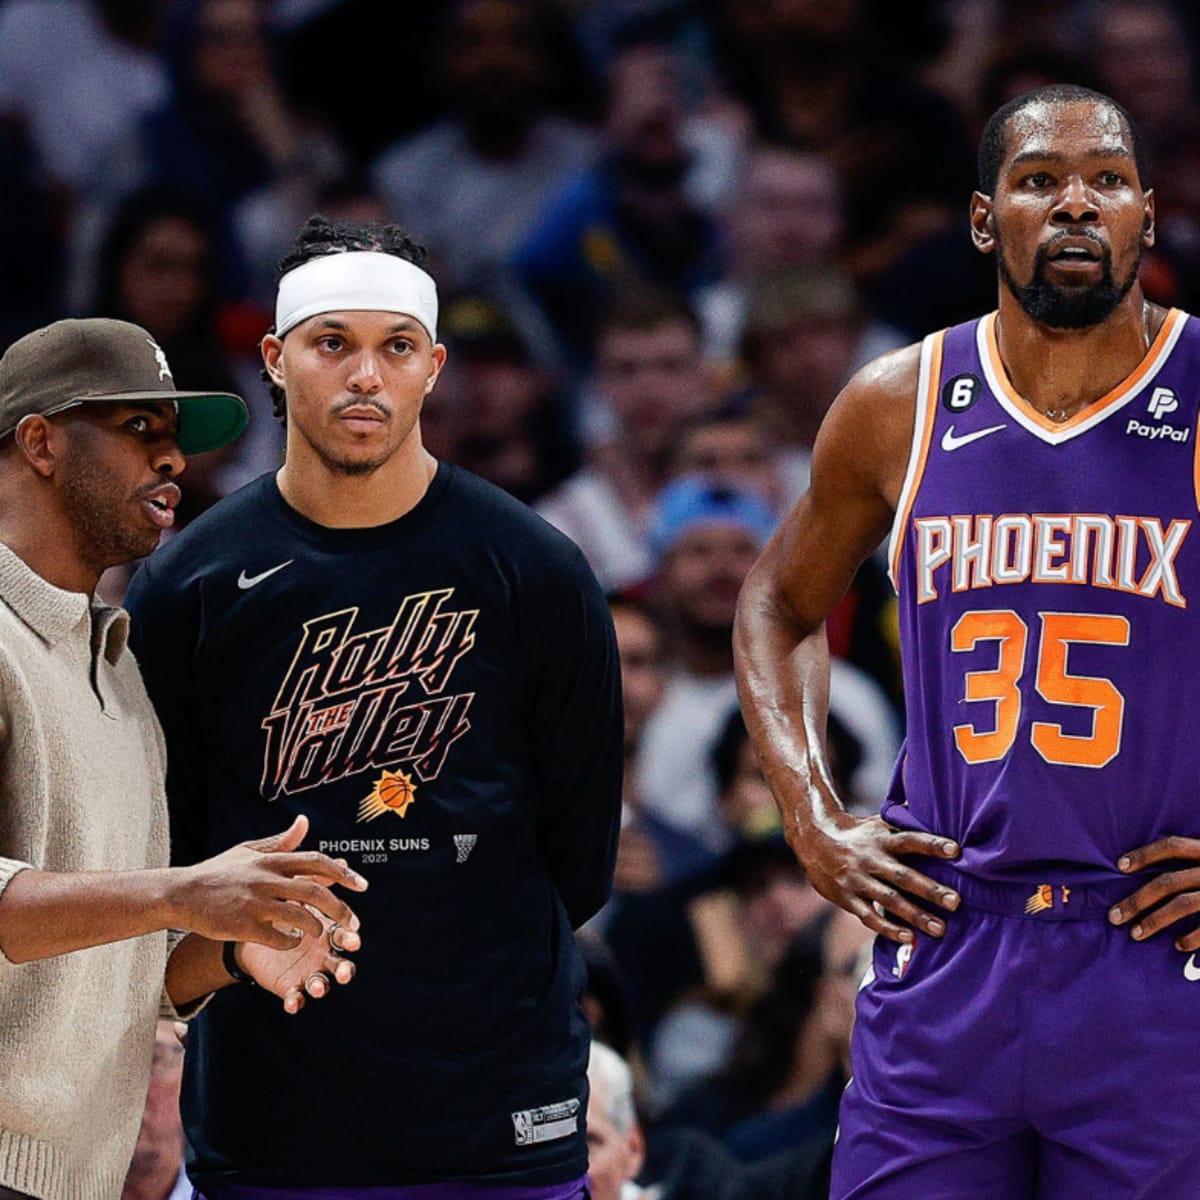 Phoenix Suns' schedule lightens up, time to make that run back to